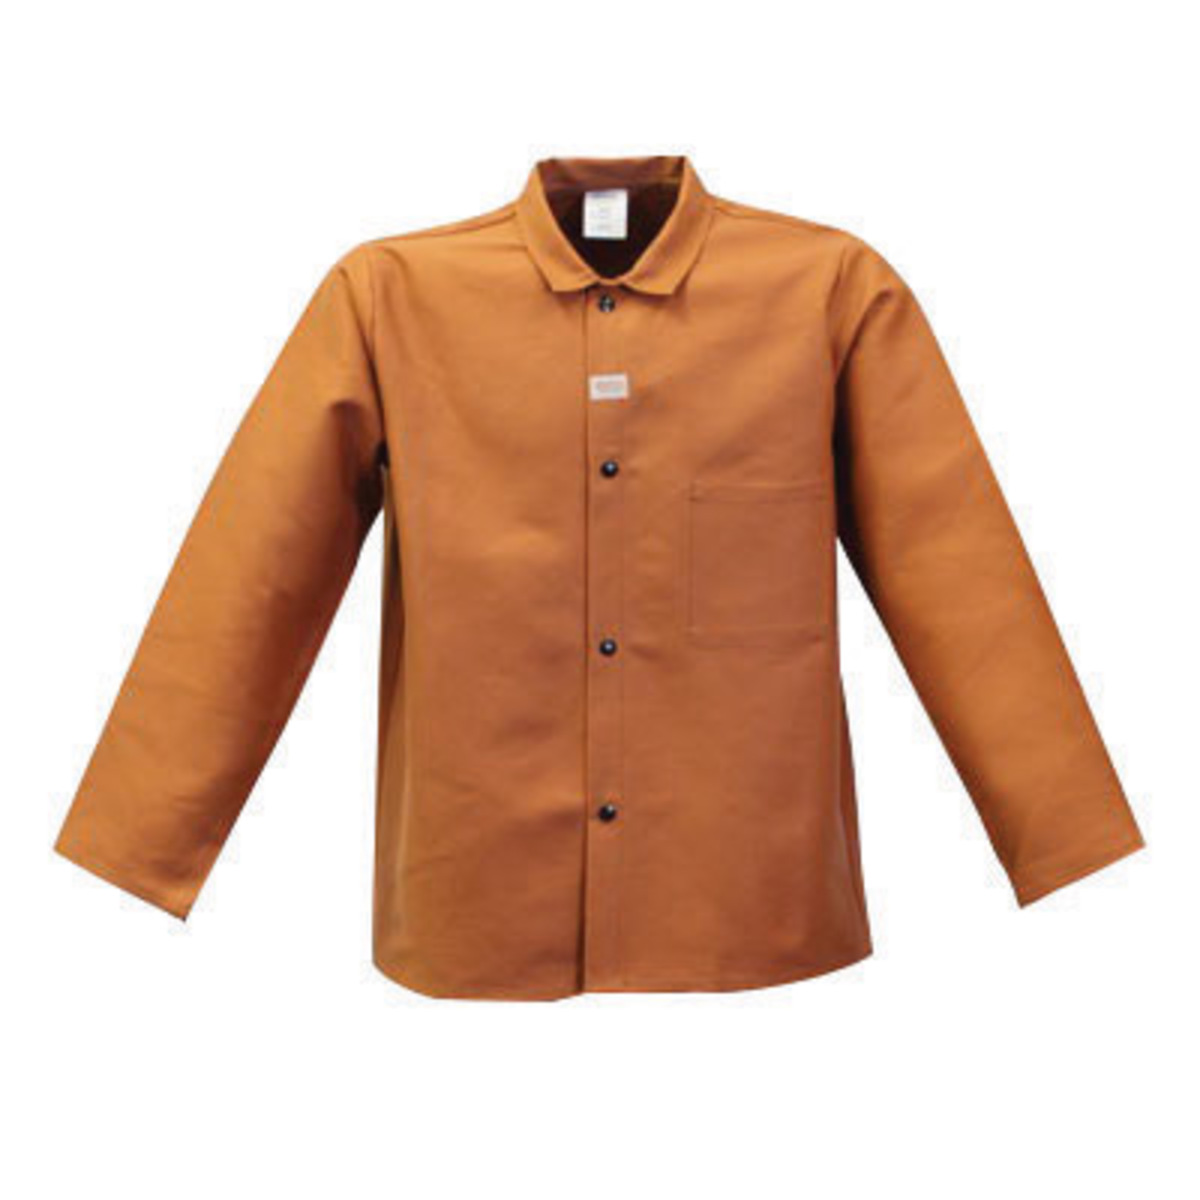 Stanco Safety Products™ Medium Rust Brown Cotton Flame Resistant Welding Jacket With Snap Closure And Leather Sleeves